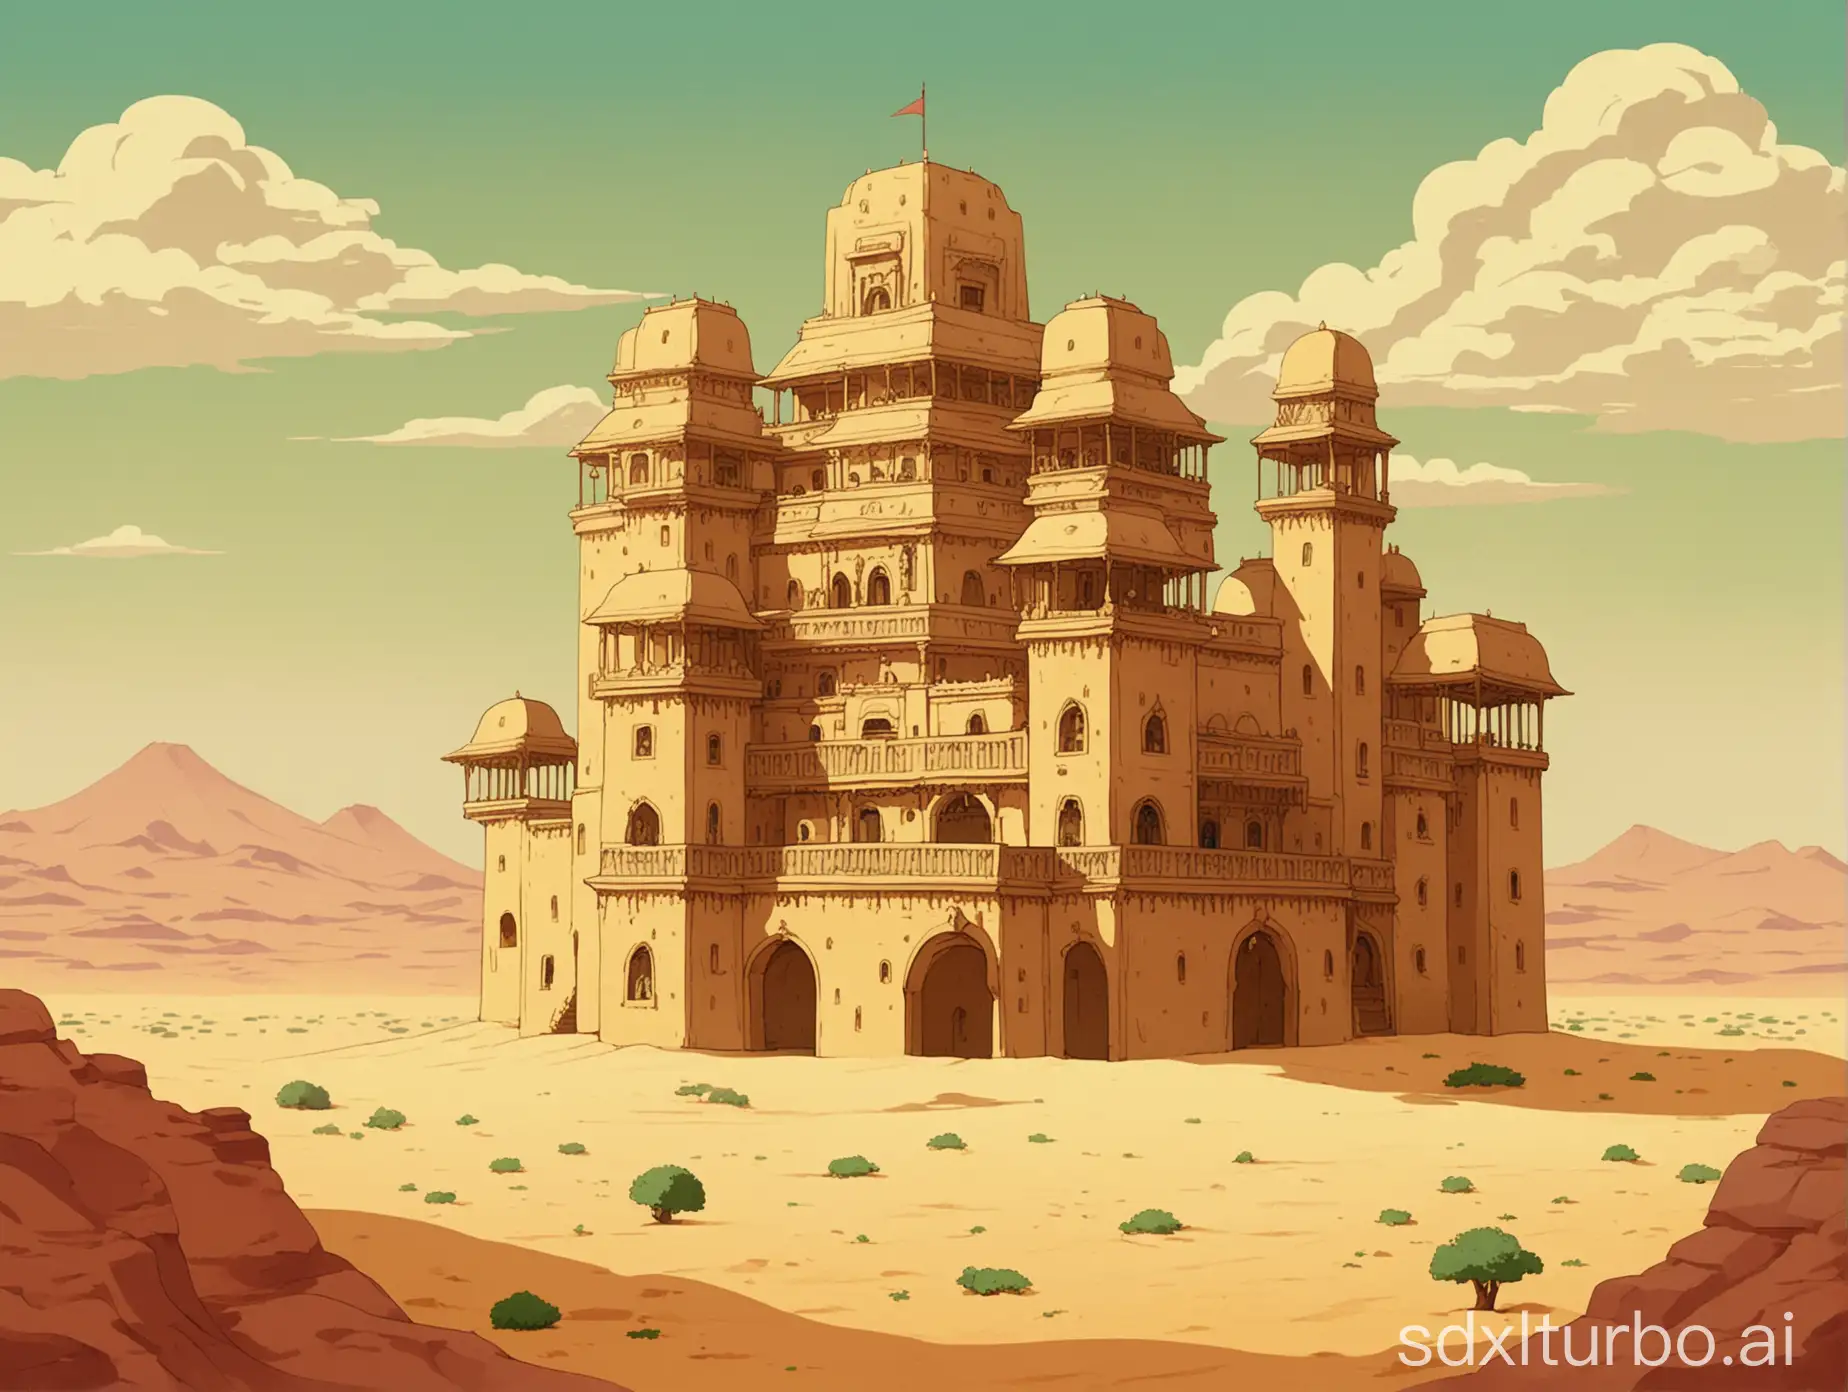 Palace in the desert in the painting style of Hayao Miyazaki